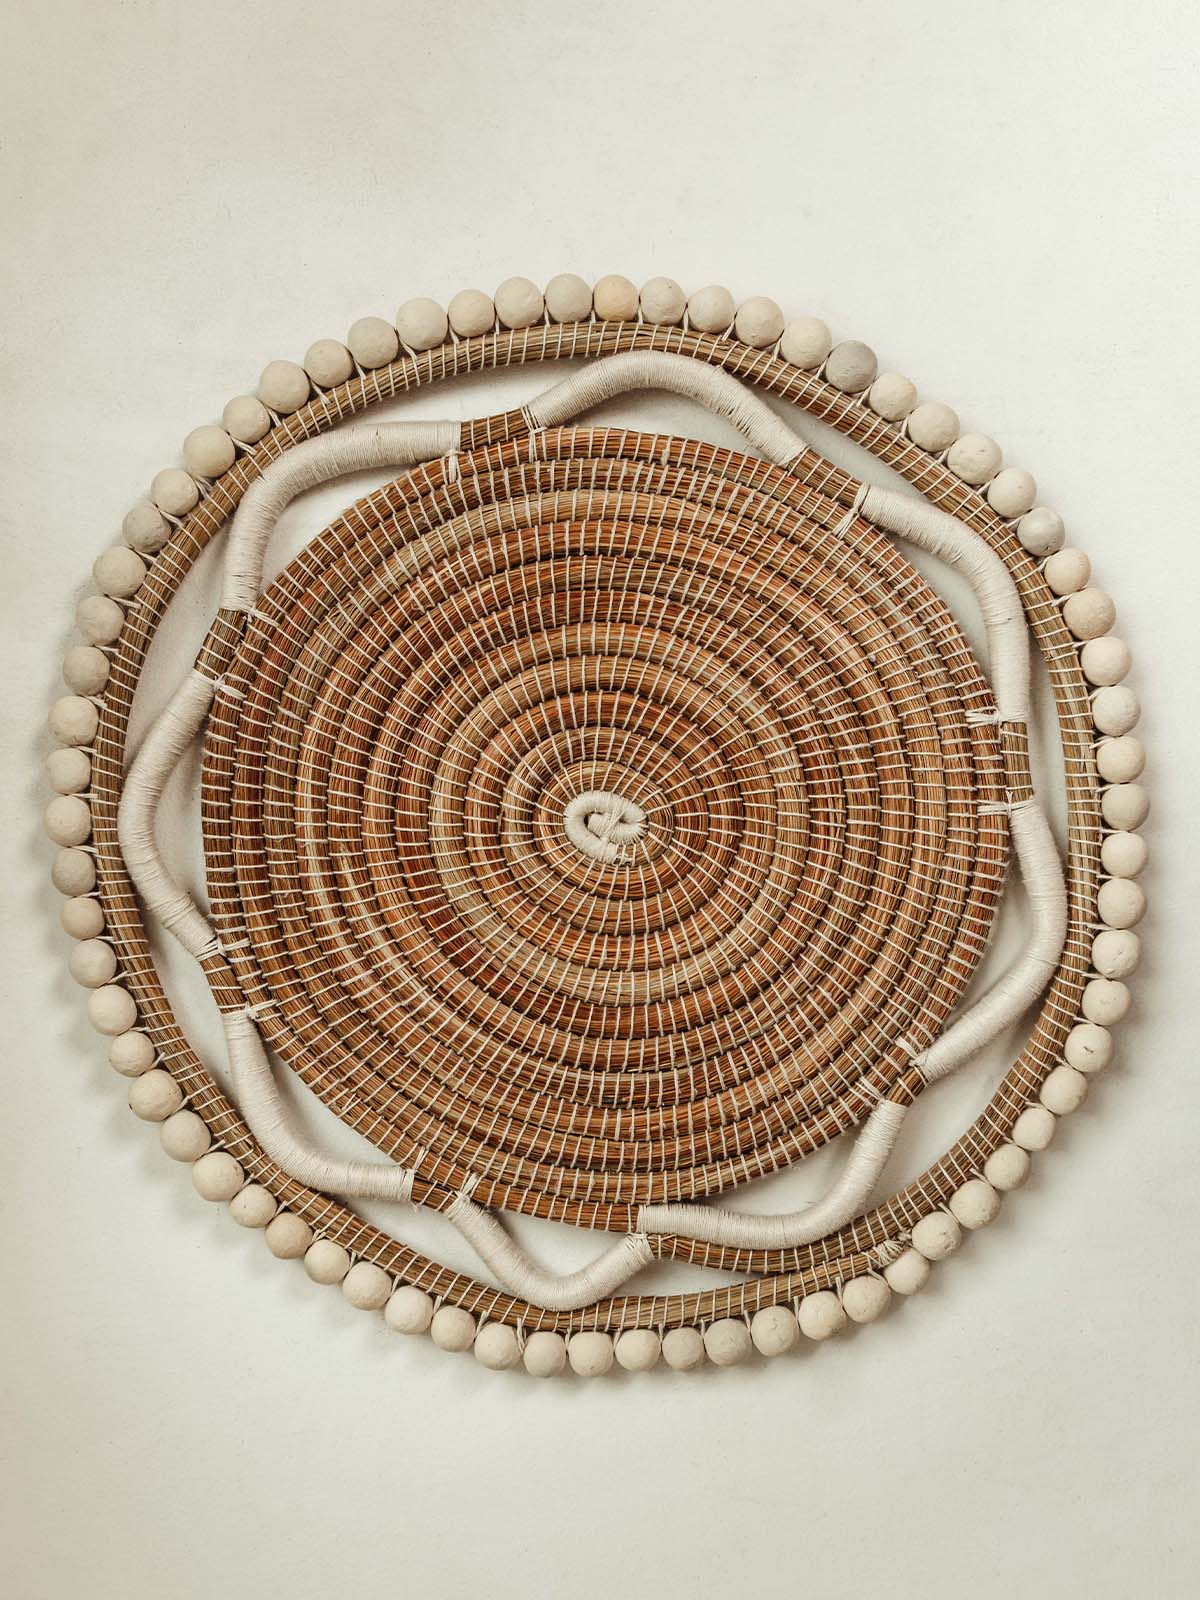 Woven beaded charger on a white table.